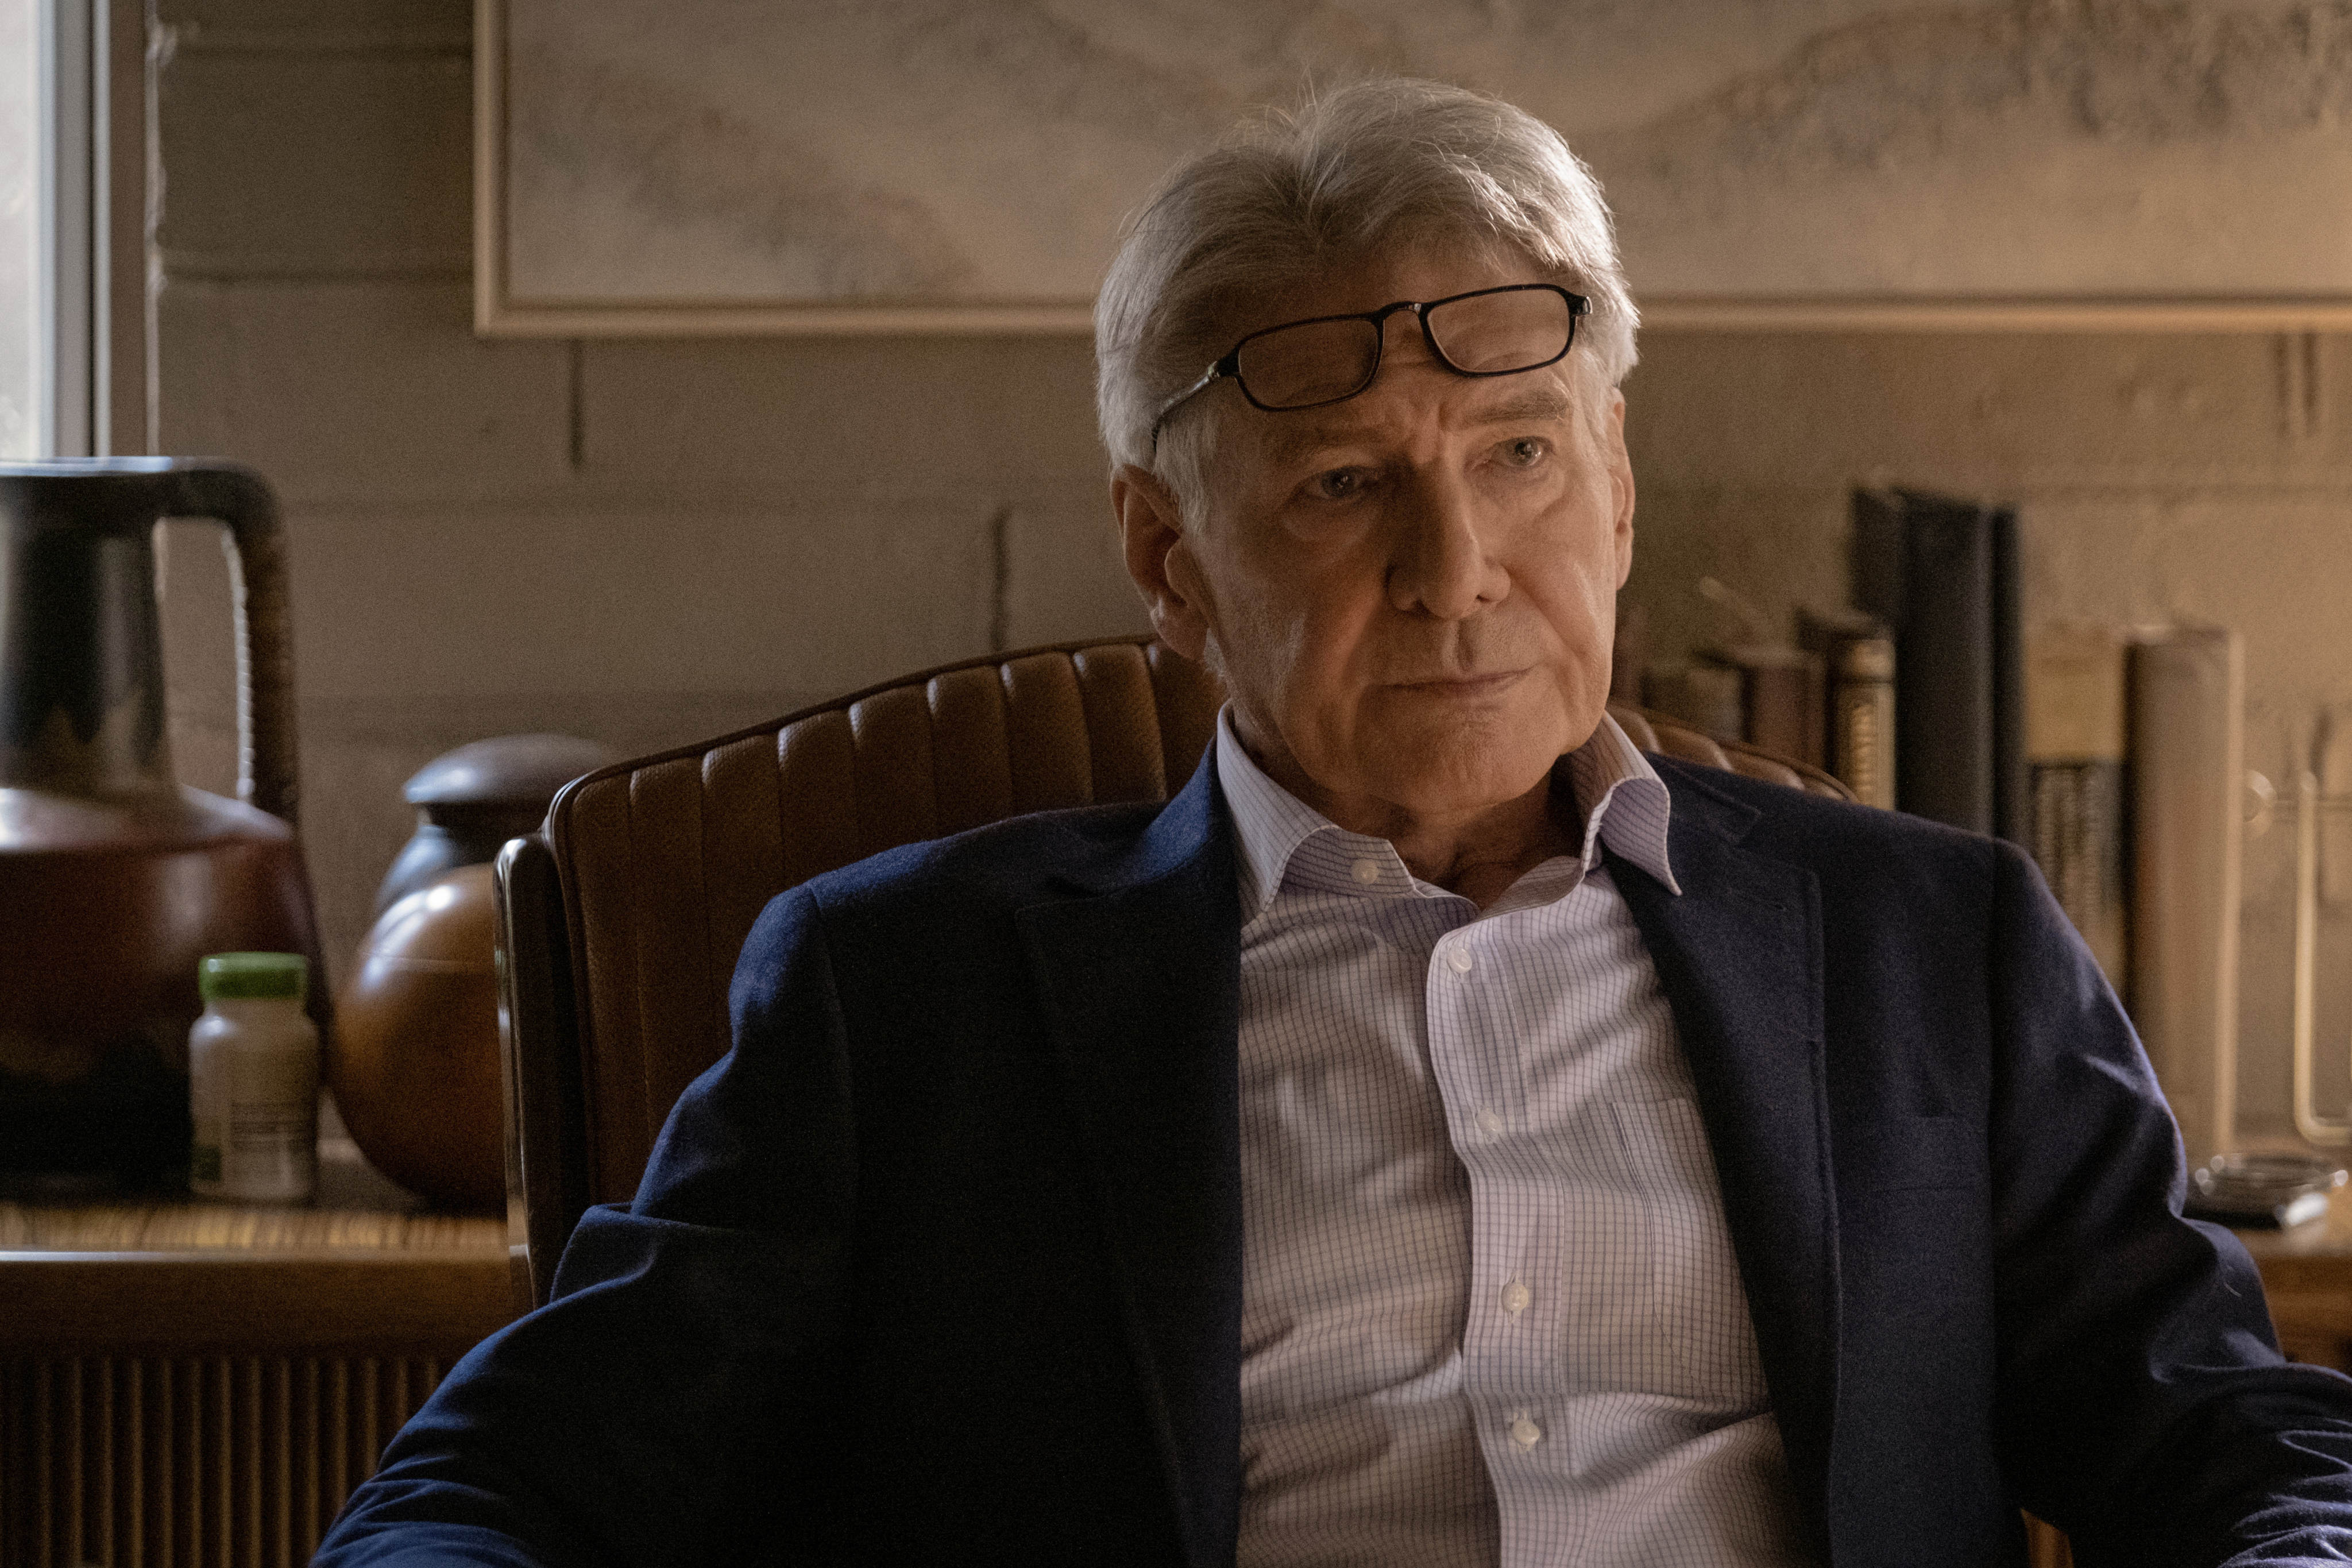 Harrison Ford plays Dr Phil Rhodes in the upcoming Apple TV+ dramedy Shrinking, and has been praised by cast members and the show’s creators for his hilarious performance. Photo: Apple TV+